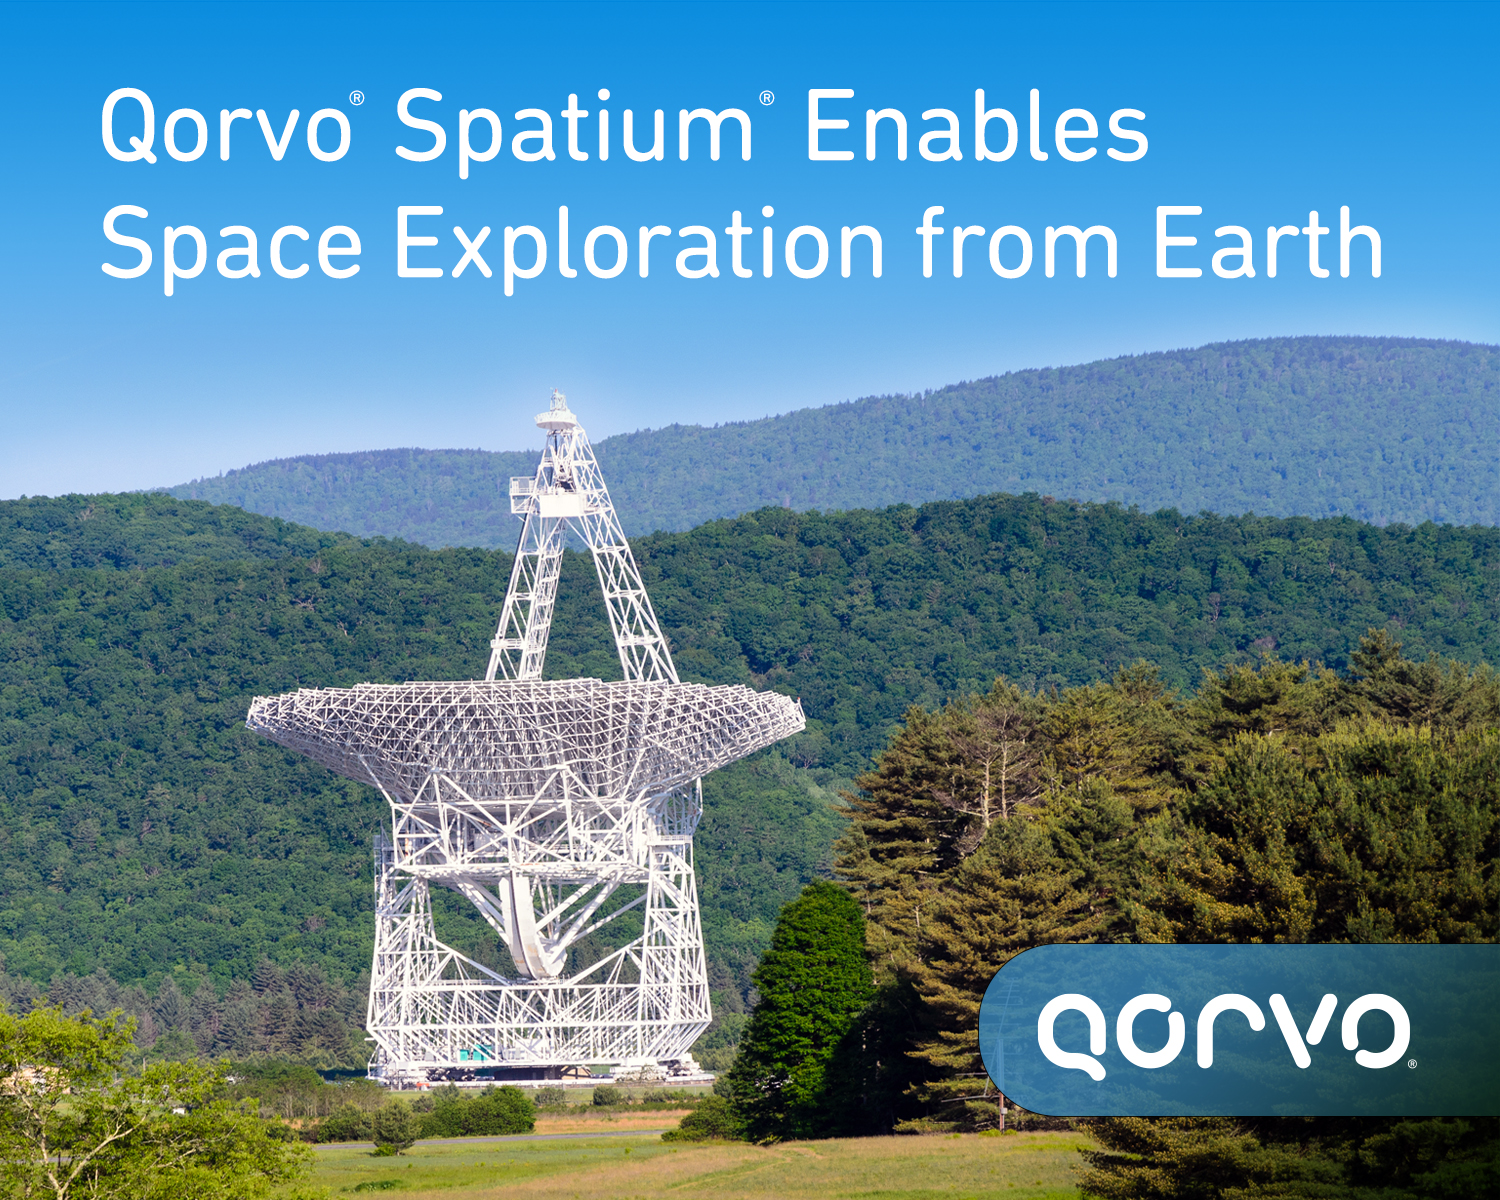 Qorvo Spatium Enables Space Exploration from Earth